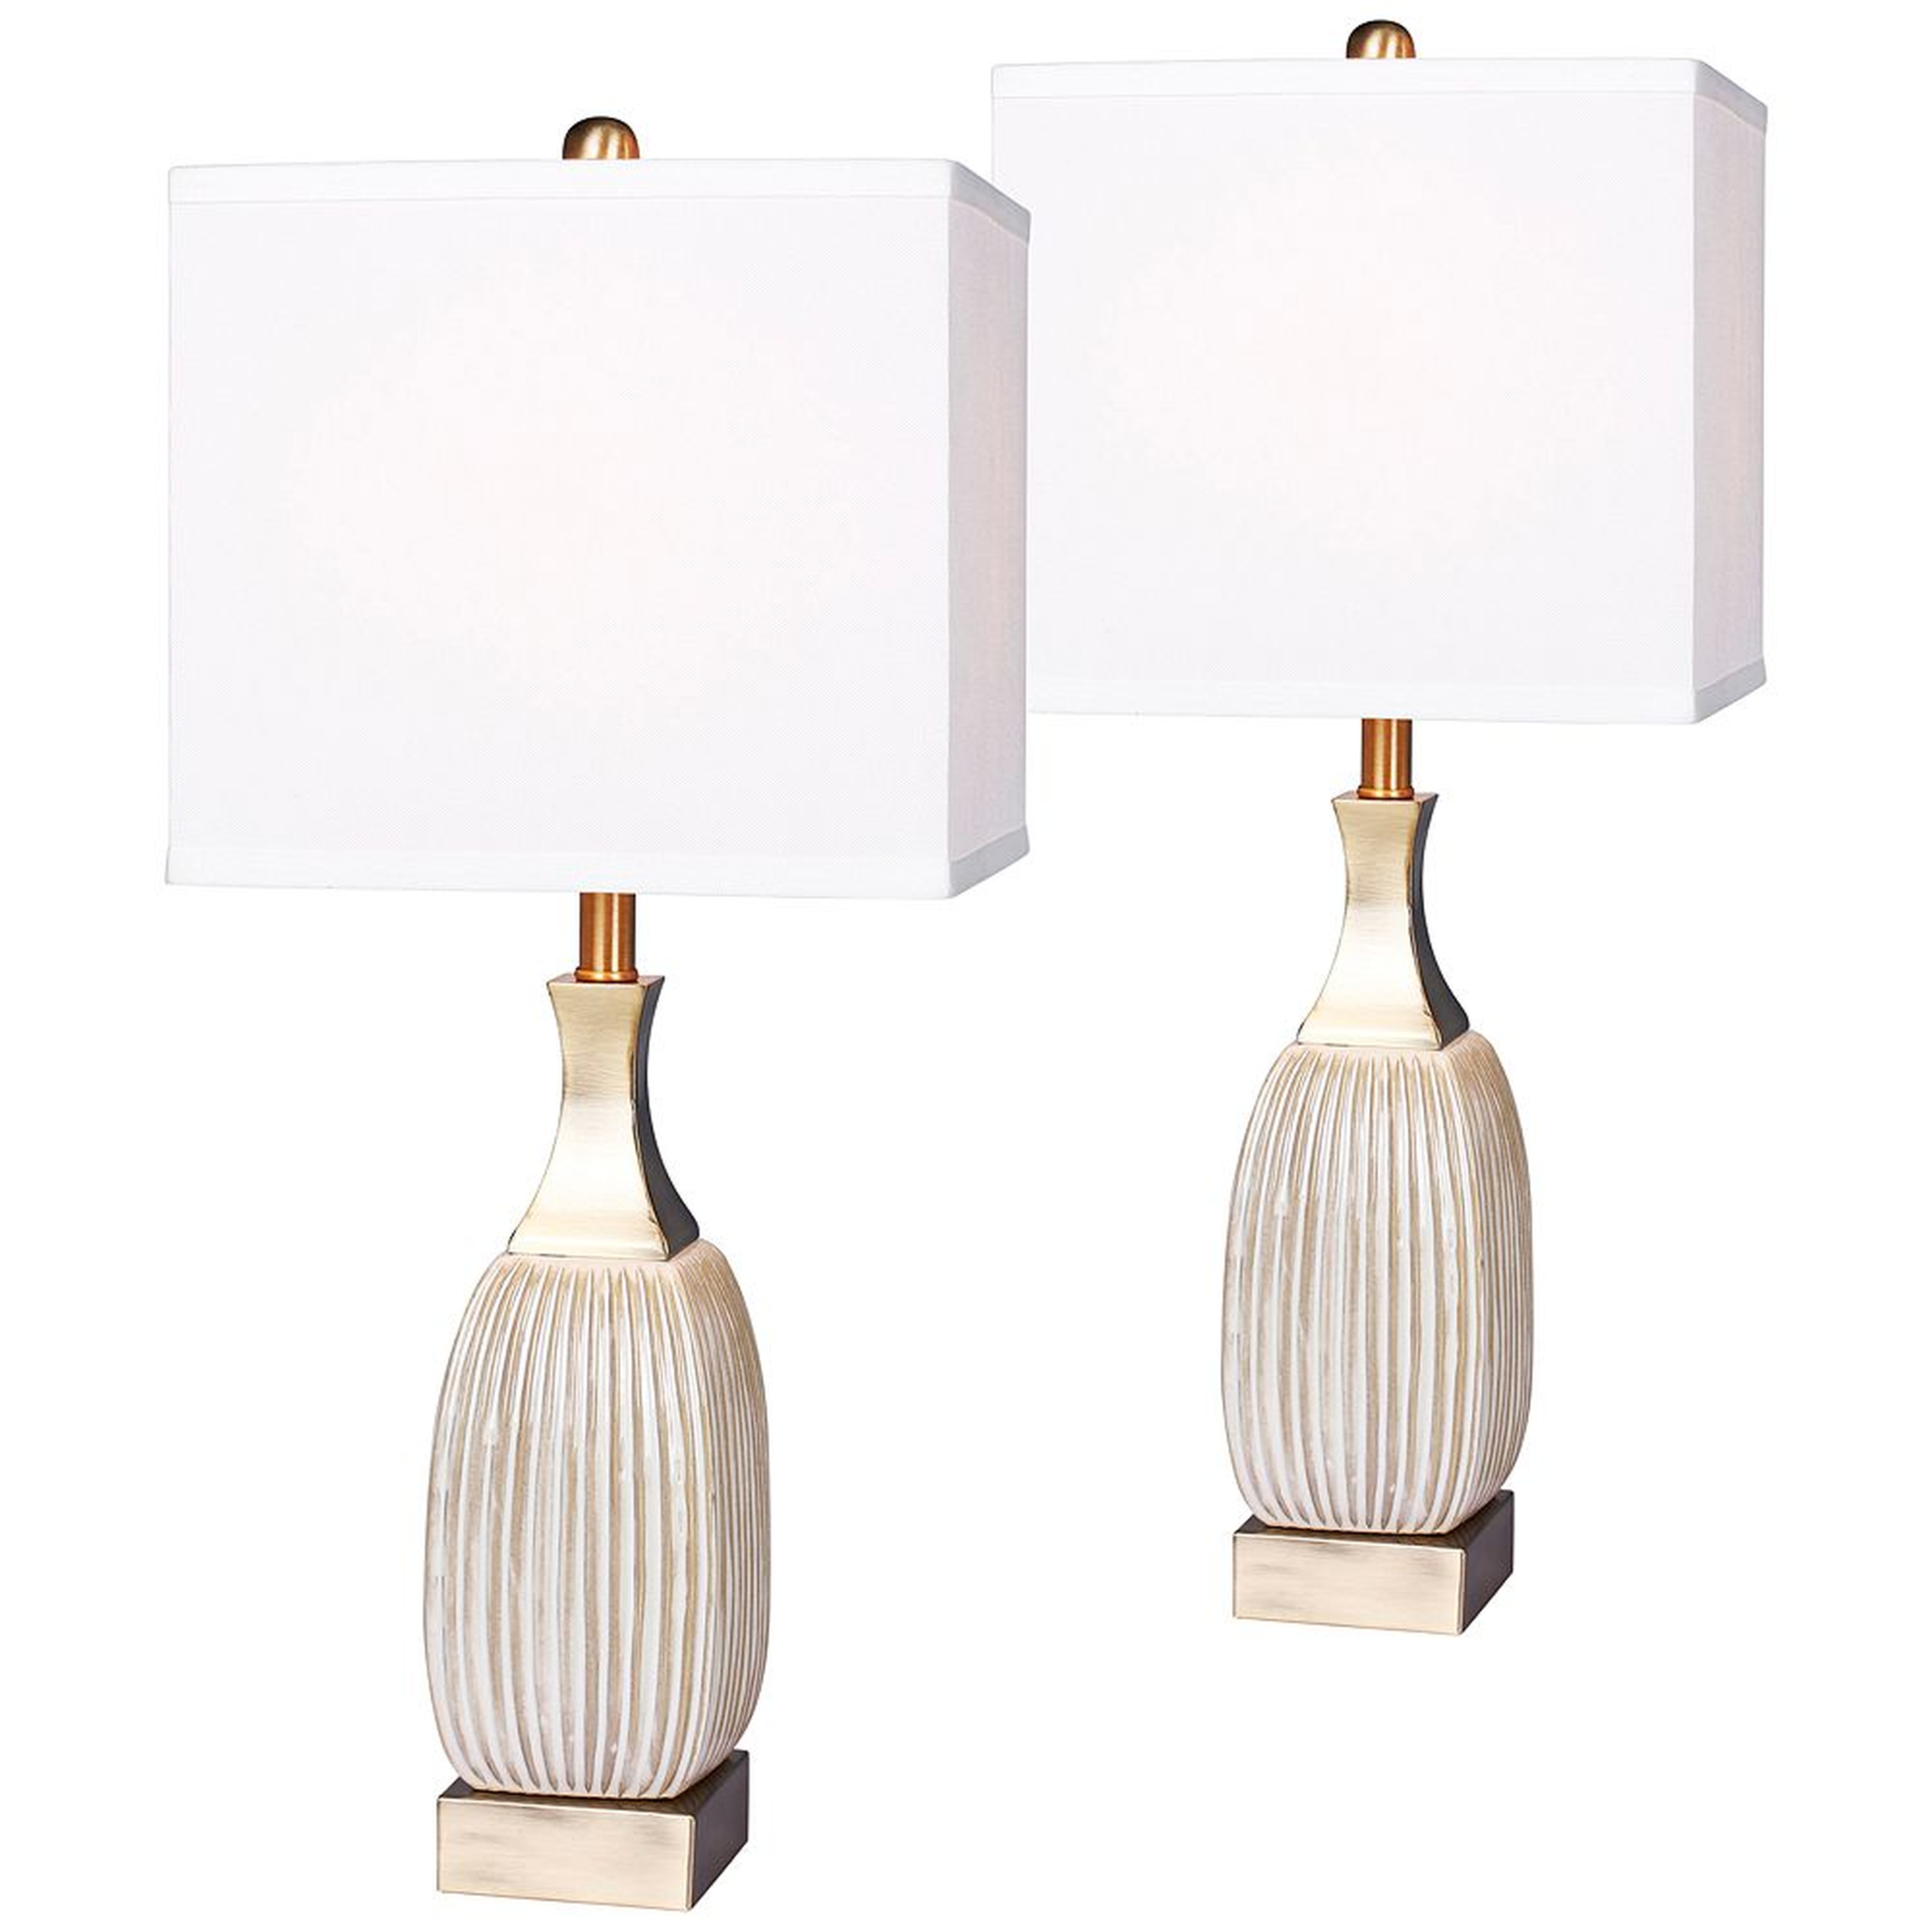 Lexie Ribbed Aged White Ceramic Table Lamp Set of 2 - Style # 47R88 - Lamps Plus